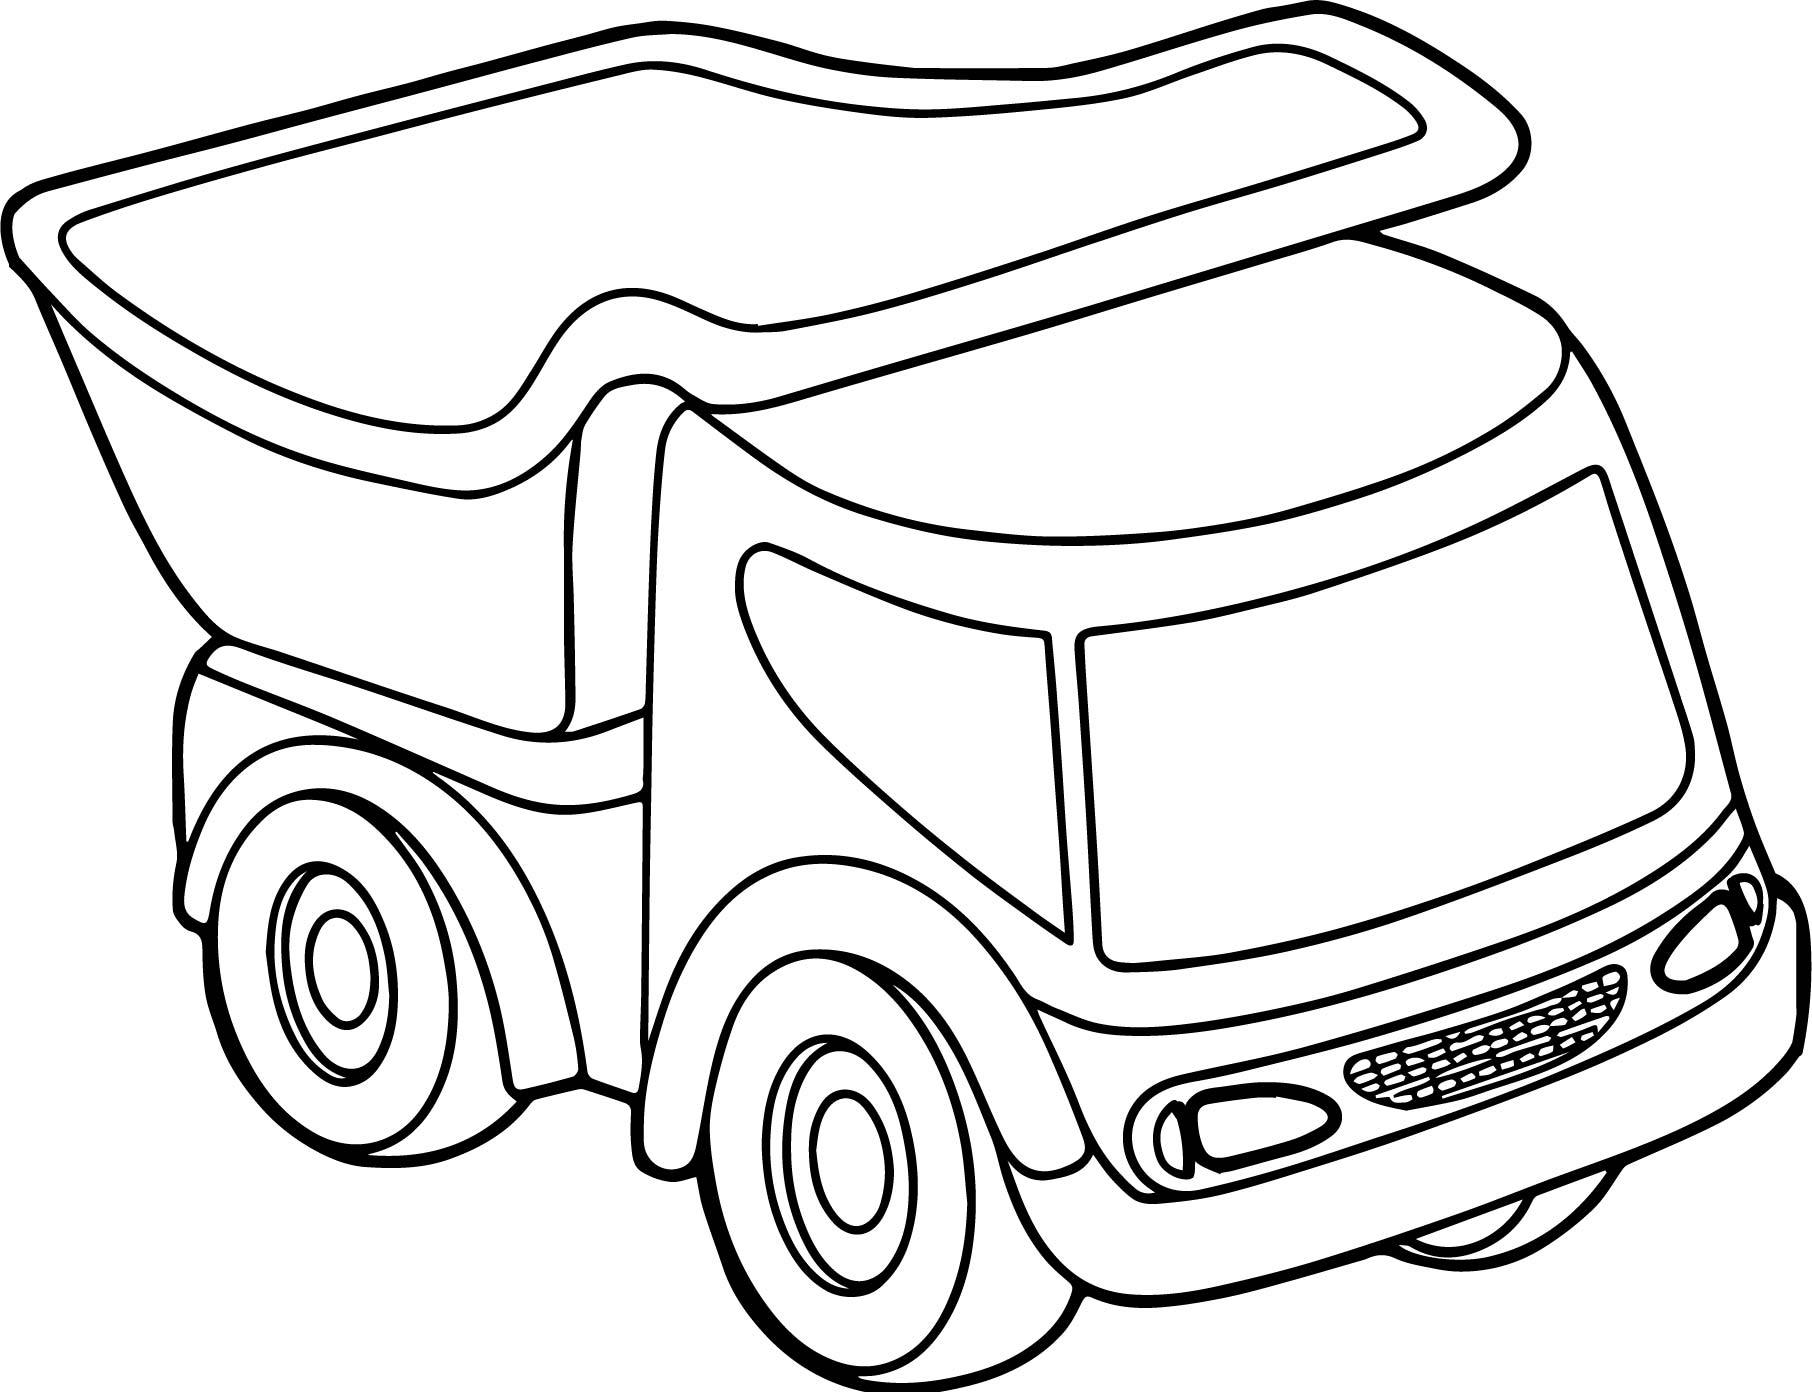 Car Truck Coloring Pages at GetColorings.com | Free printable colorings